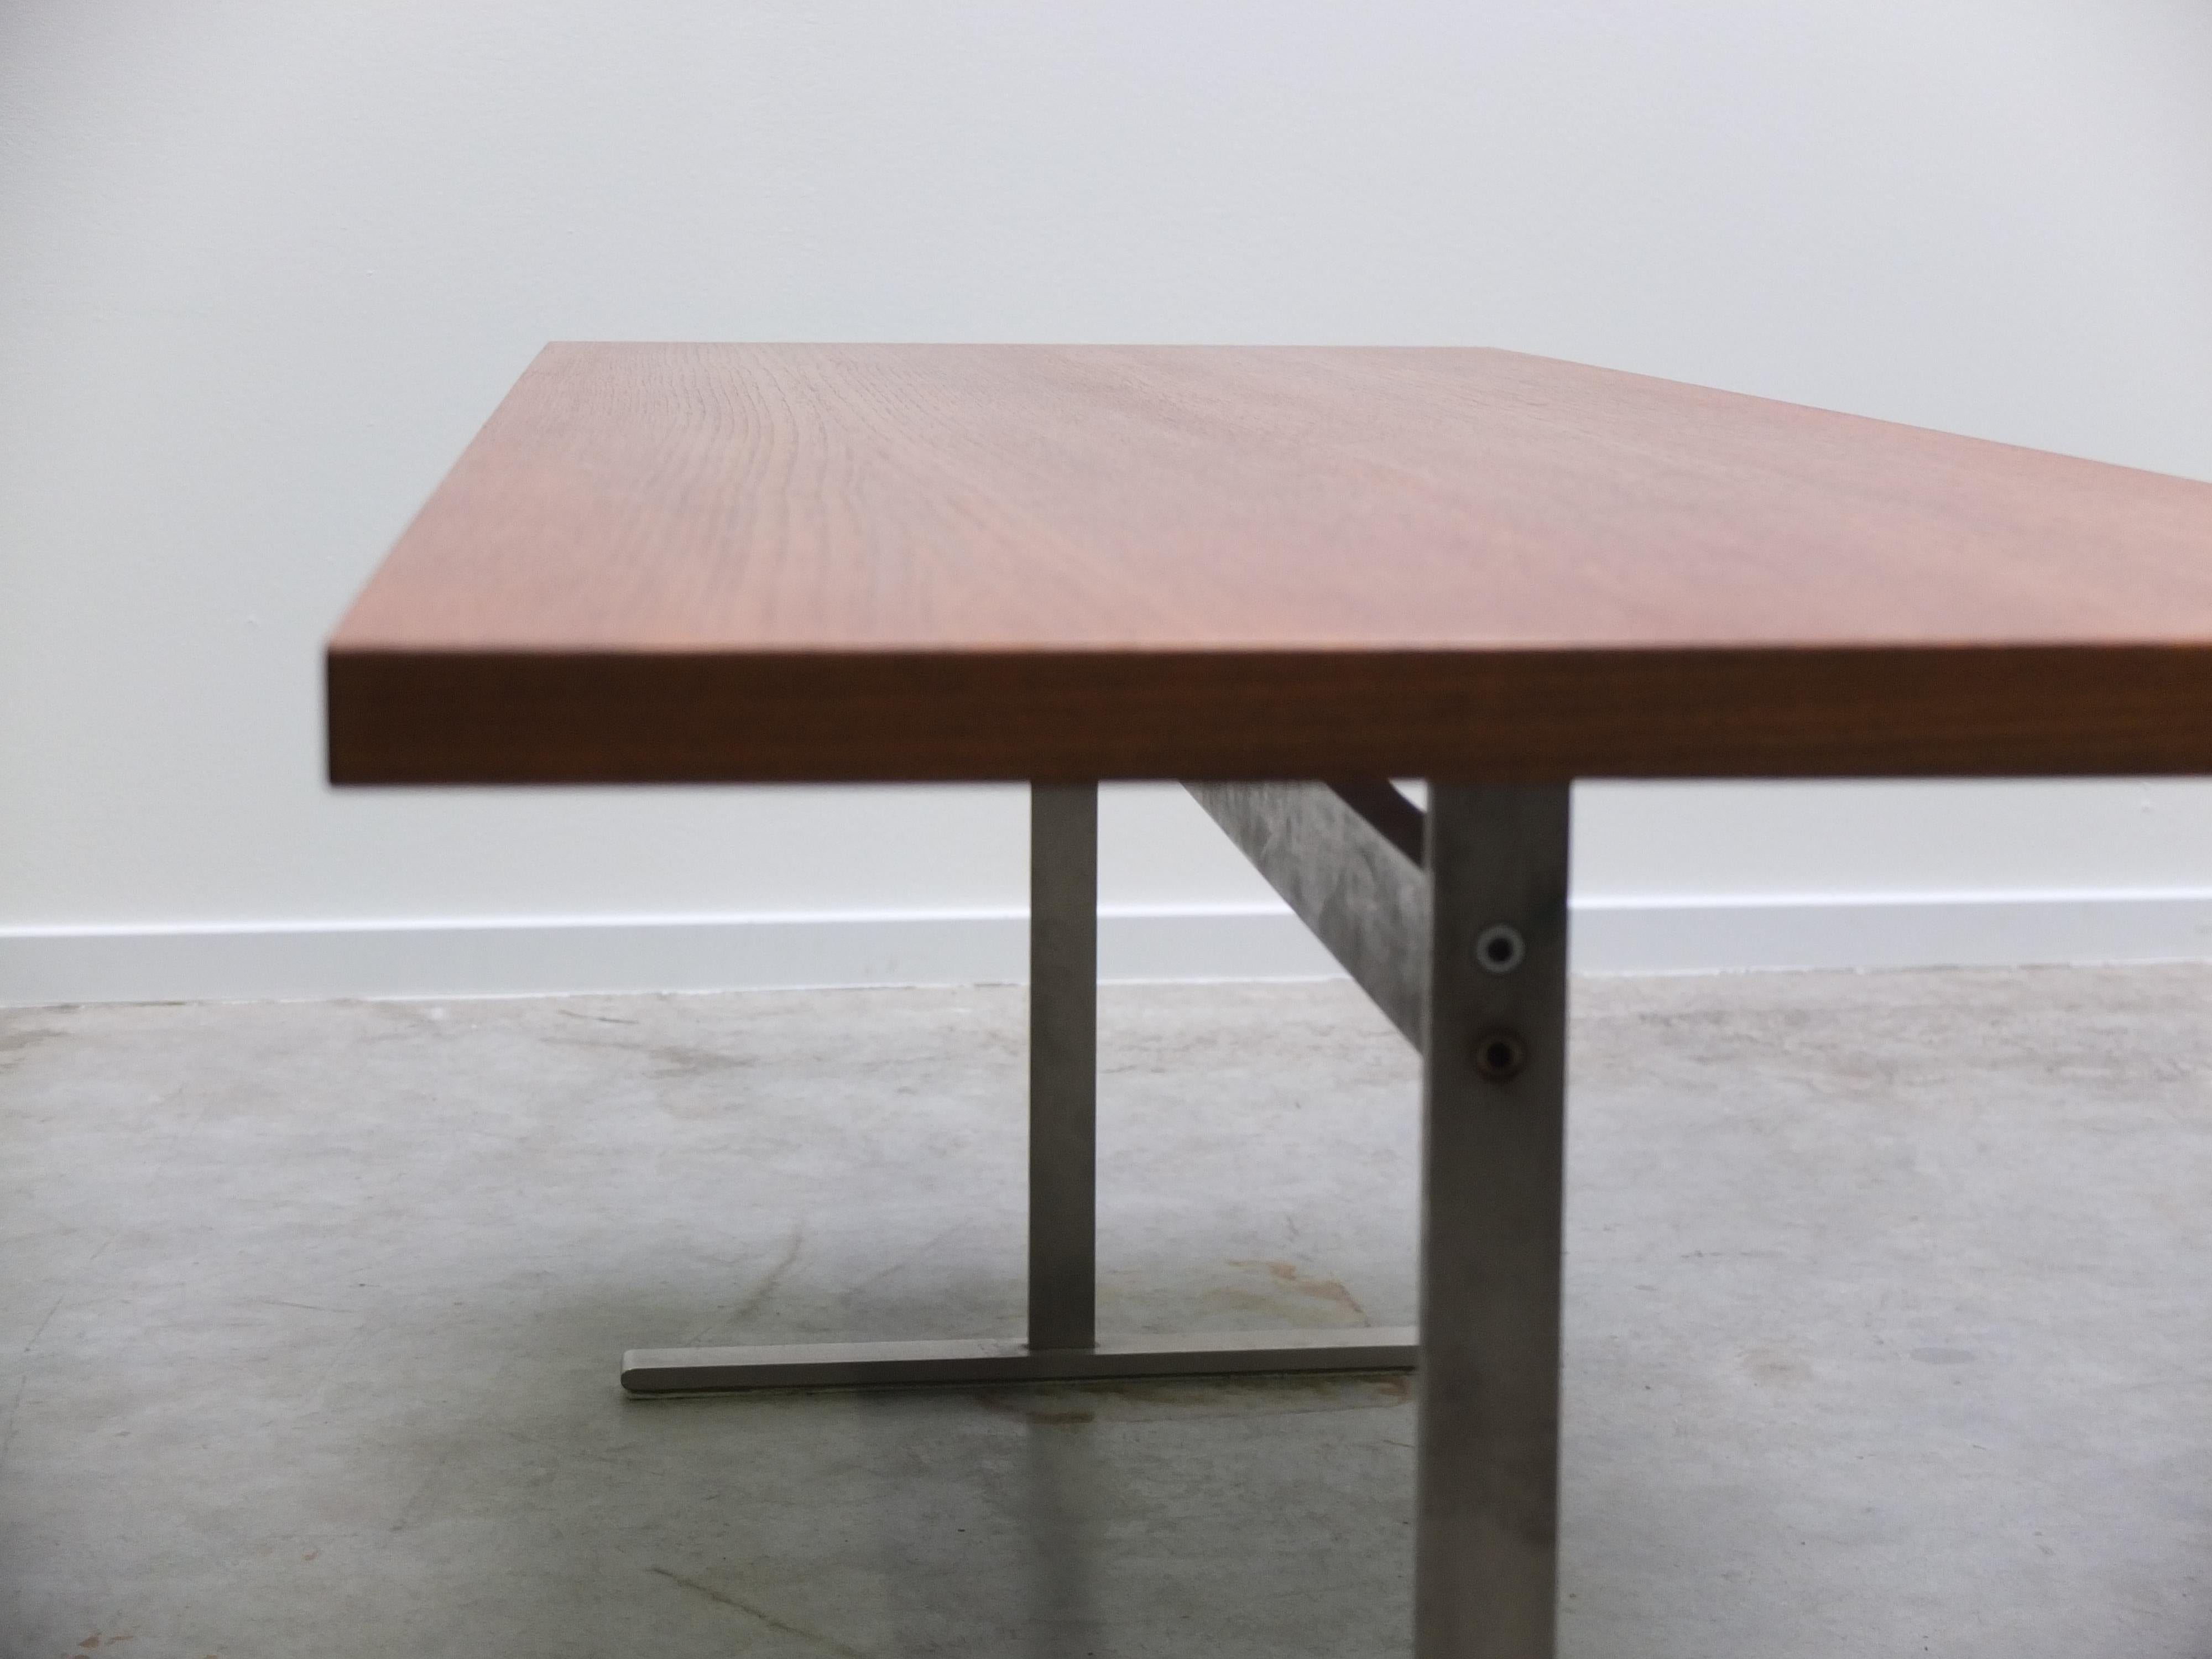 Large Modernist Teak Coffee Table in the Style of Arne Jacobsen, 1960s For Sale 4